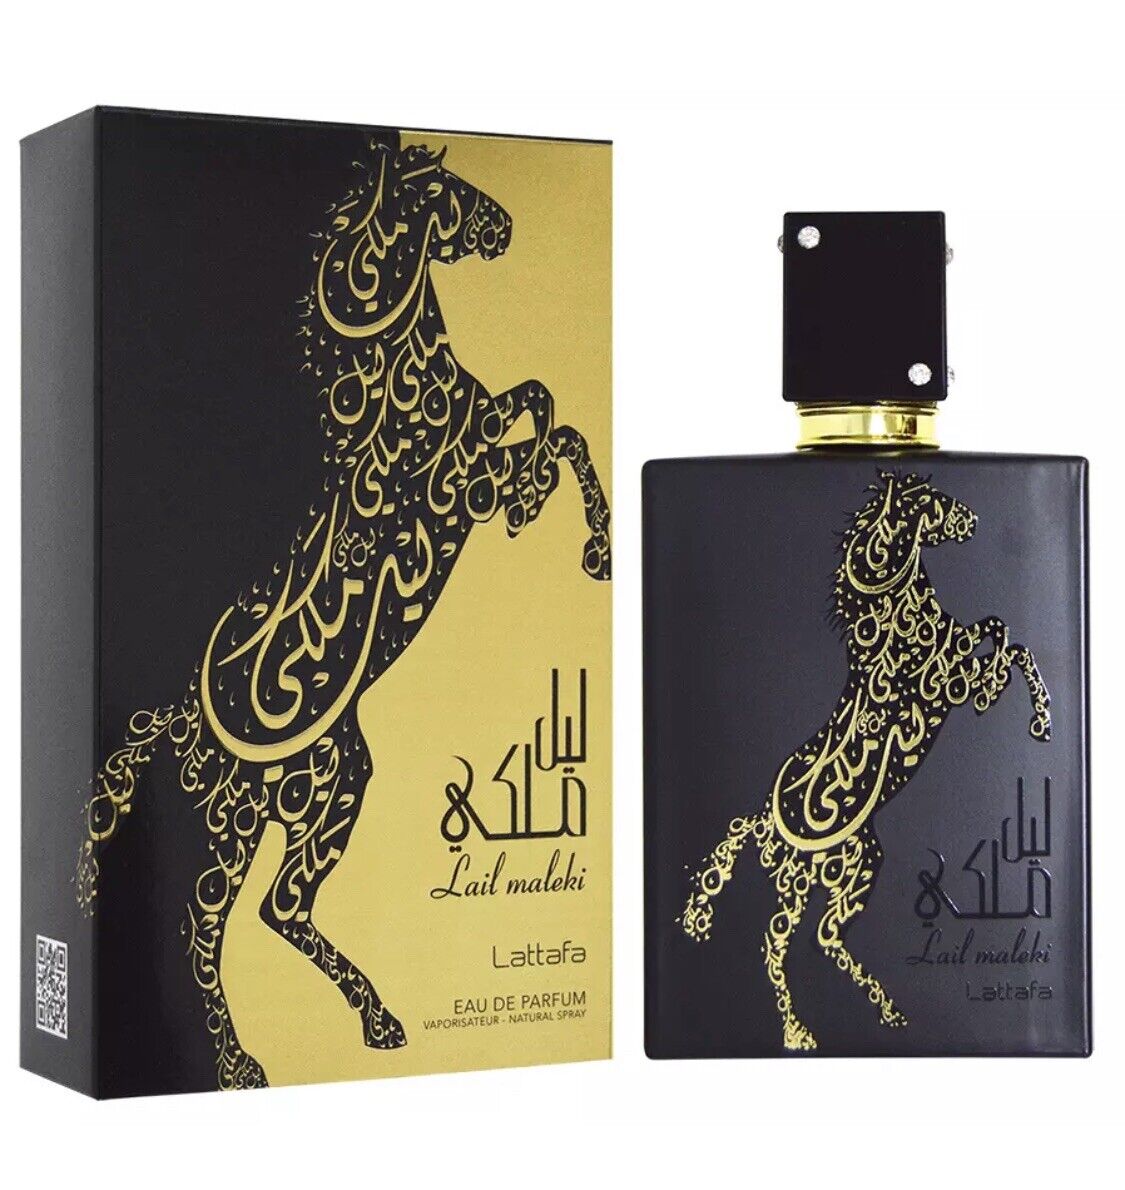 <span>Lail Maleki by Lattafa opens with spicy and vigorous notes of Cardamom, combined with the fresh scent of basil. At the heart, the African Wild Pear wood, a distinctive woody note, used for the first time in this fragrance, is joined by spicy Nutmeg. The base reveals the original, soft and spicy richness with warm Amber, Cedarwood and Sandalwood, alongside deep and refined accords of Cistus Labdanum.</span>